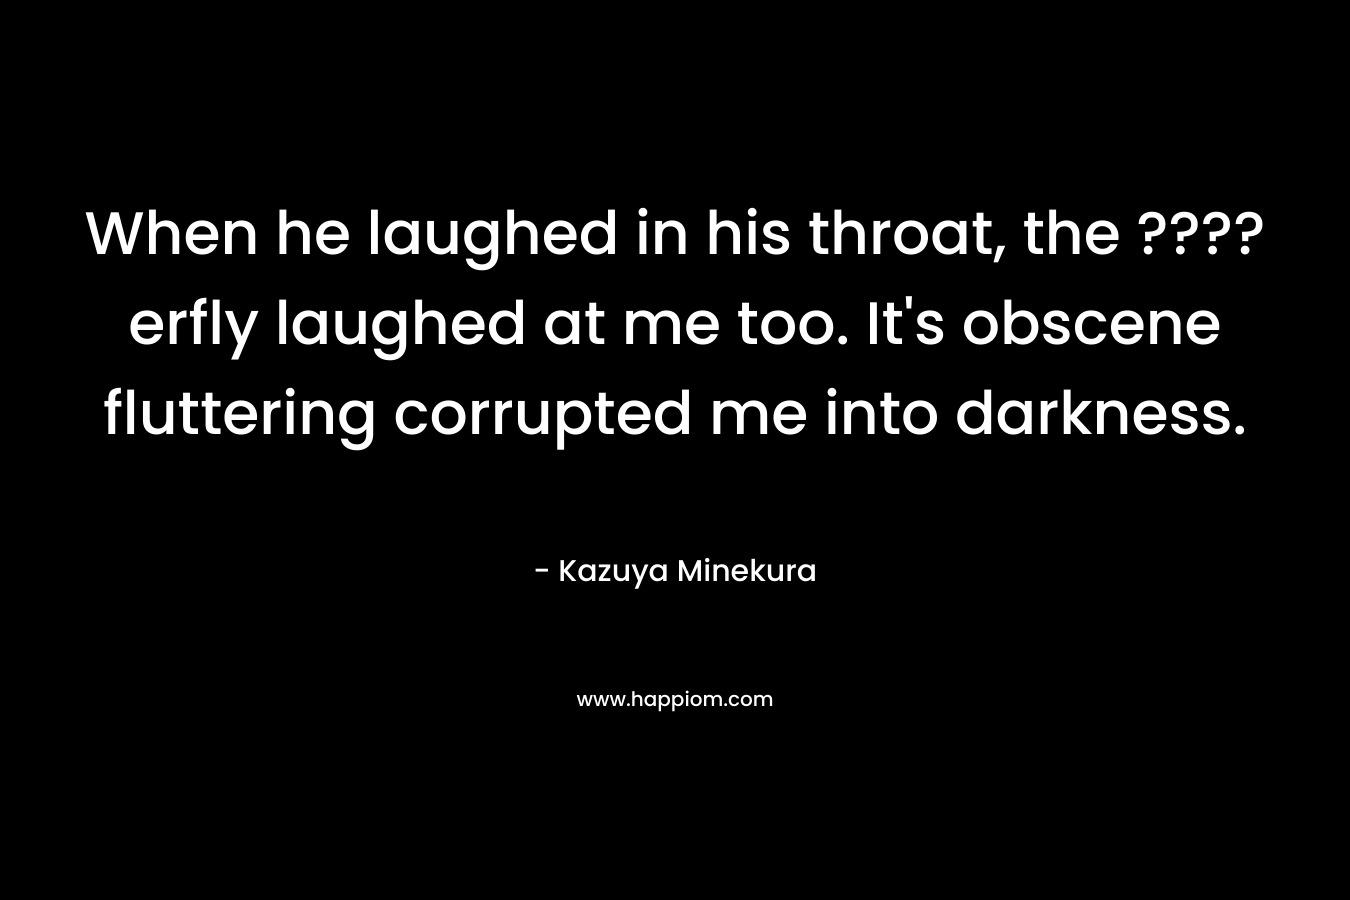 When he laughed in his throat, the ????erfly laughed at me too. It’s obscene fluttering corrupted me into darkness. – Kazuya Minekura